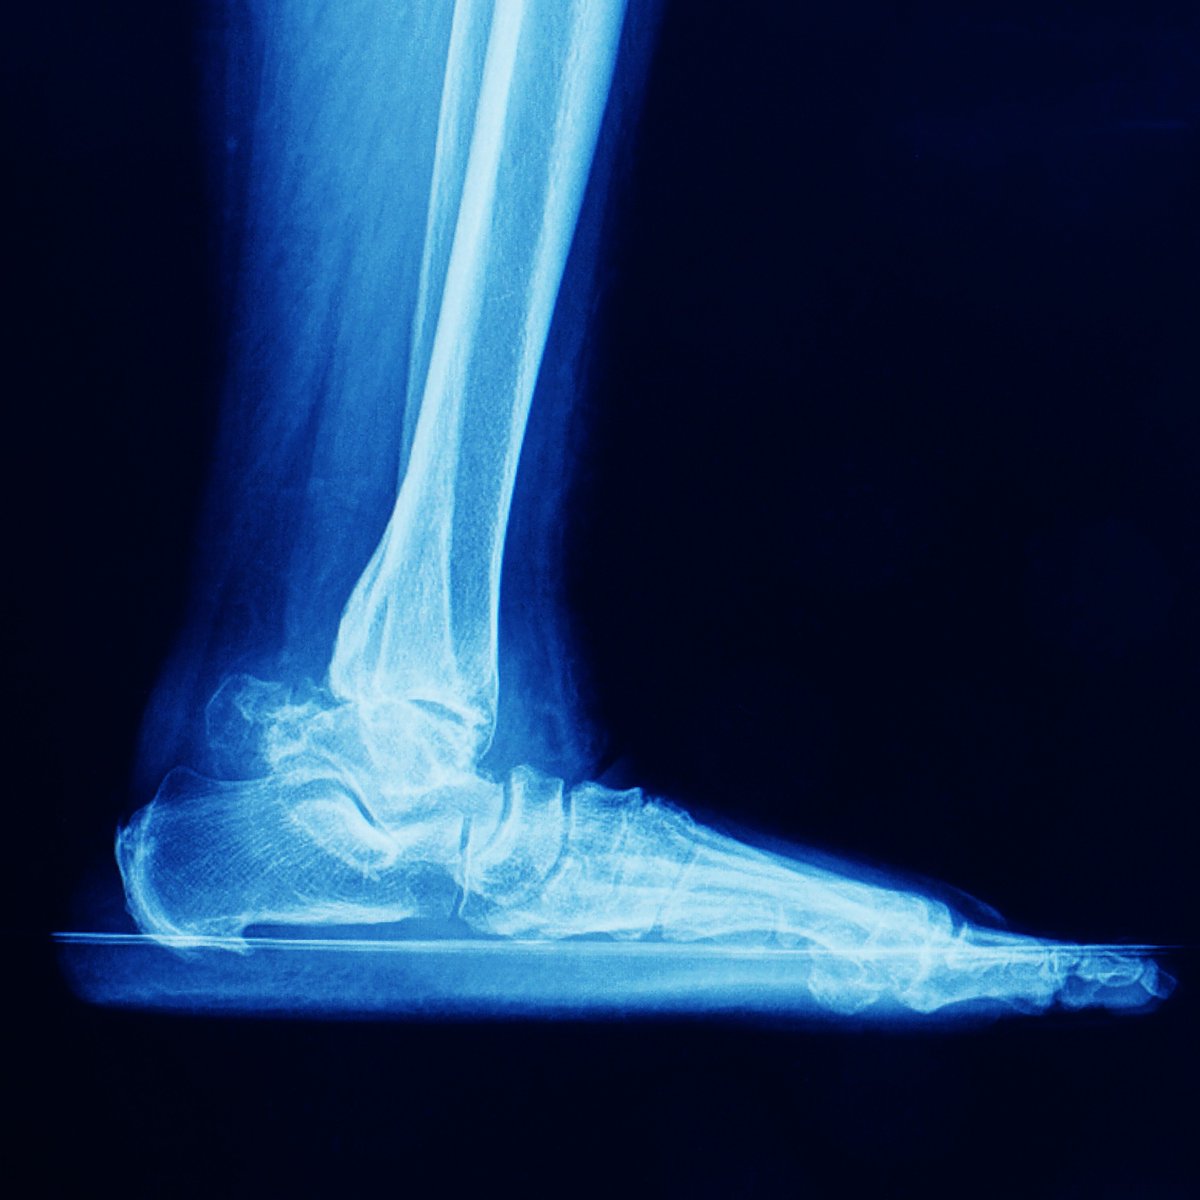 FASO offers diagnosis and treatment for a wide range of orthopedic injuries and conditions, including ankle arthritis. 

With proper treatment, many people with ankle arthritis are able to managepain and continue leading an active lifestyle. 

Call us at (405) 418-4500.